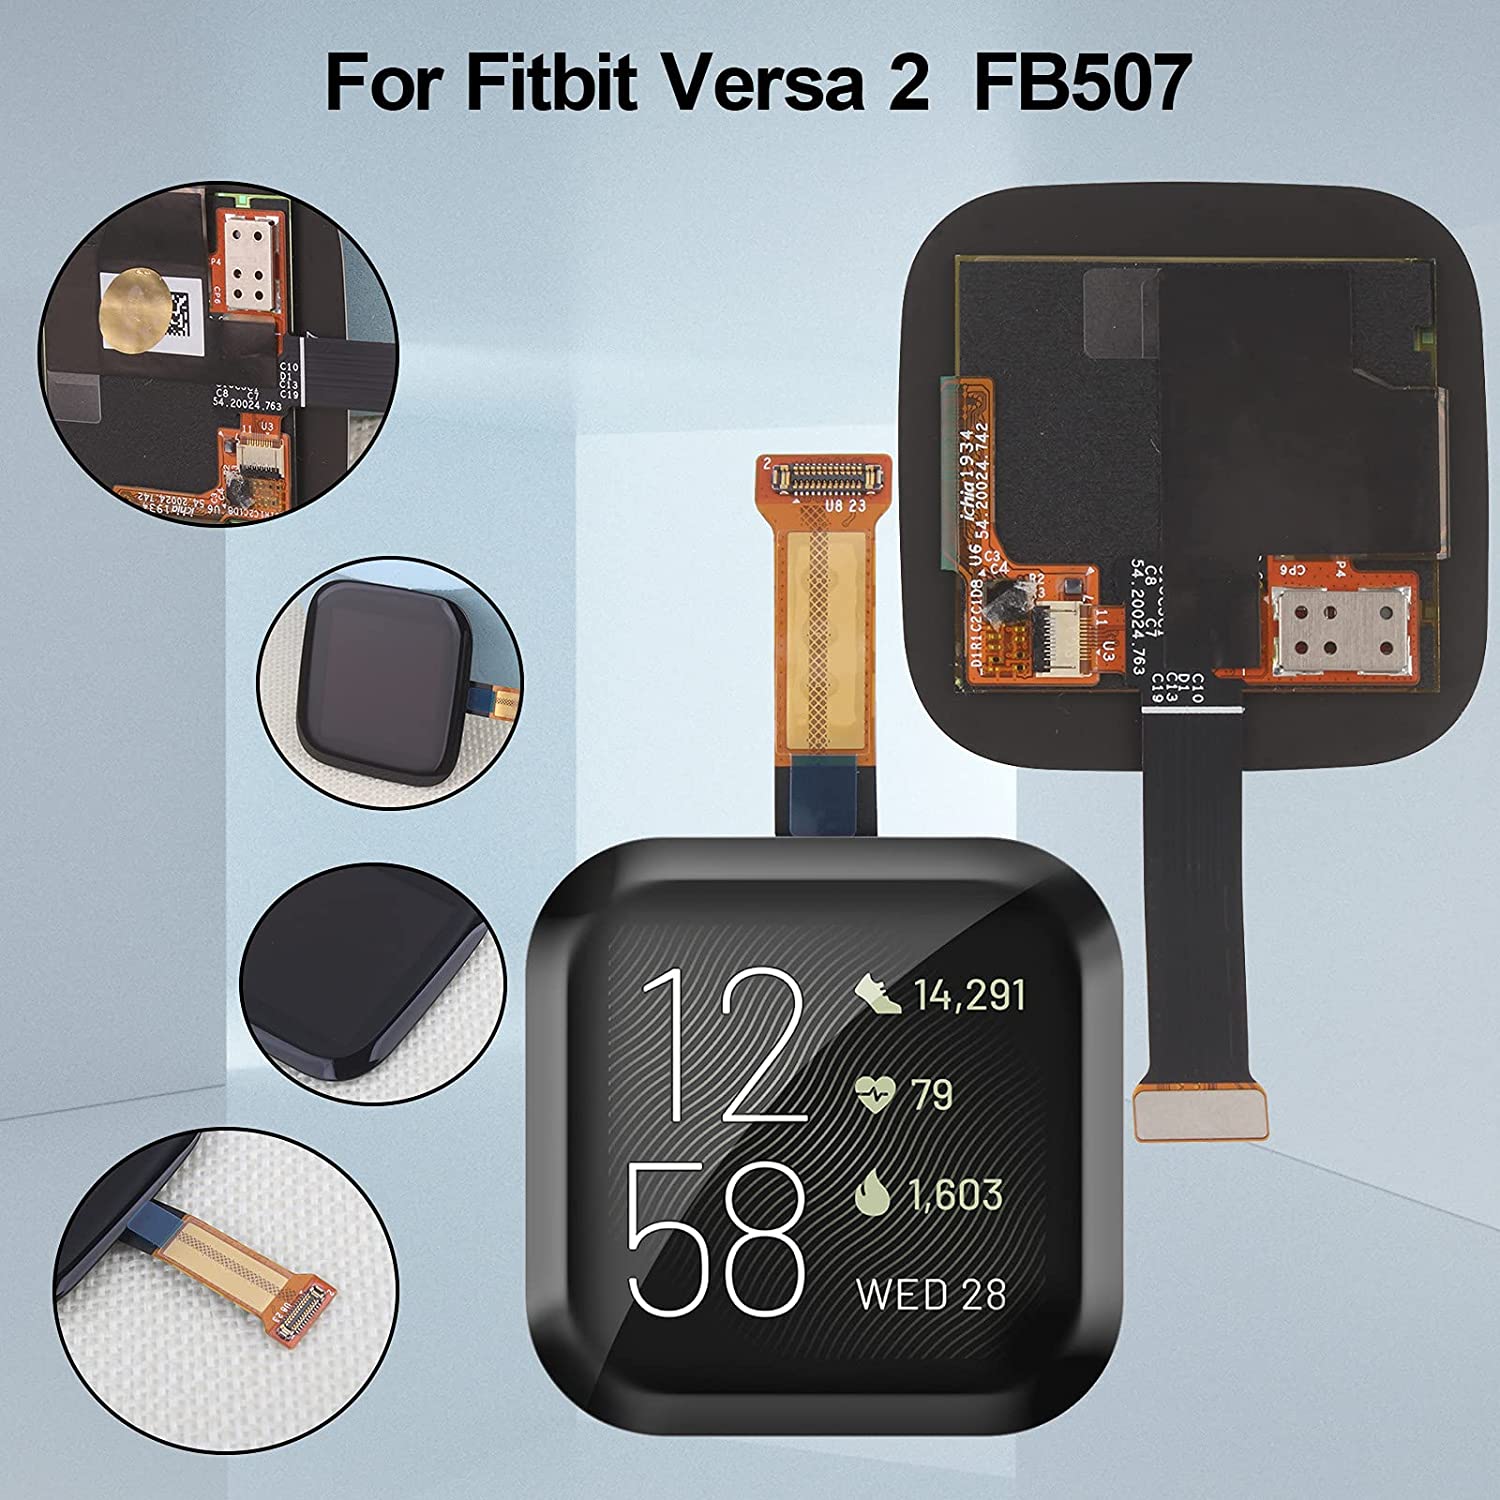 YWLRONG Screen Replacement for Fitbit Versa 3 FB511 / Fitbit Sense FB512 Watch LCD Display Touch Screen Digitizer Assembly with Tools(Black)